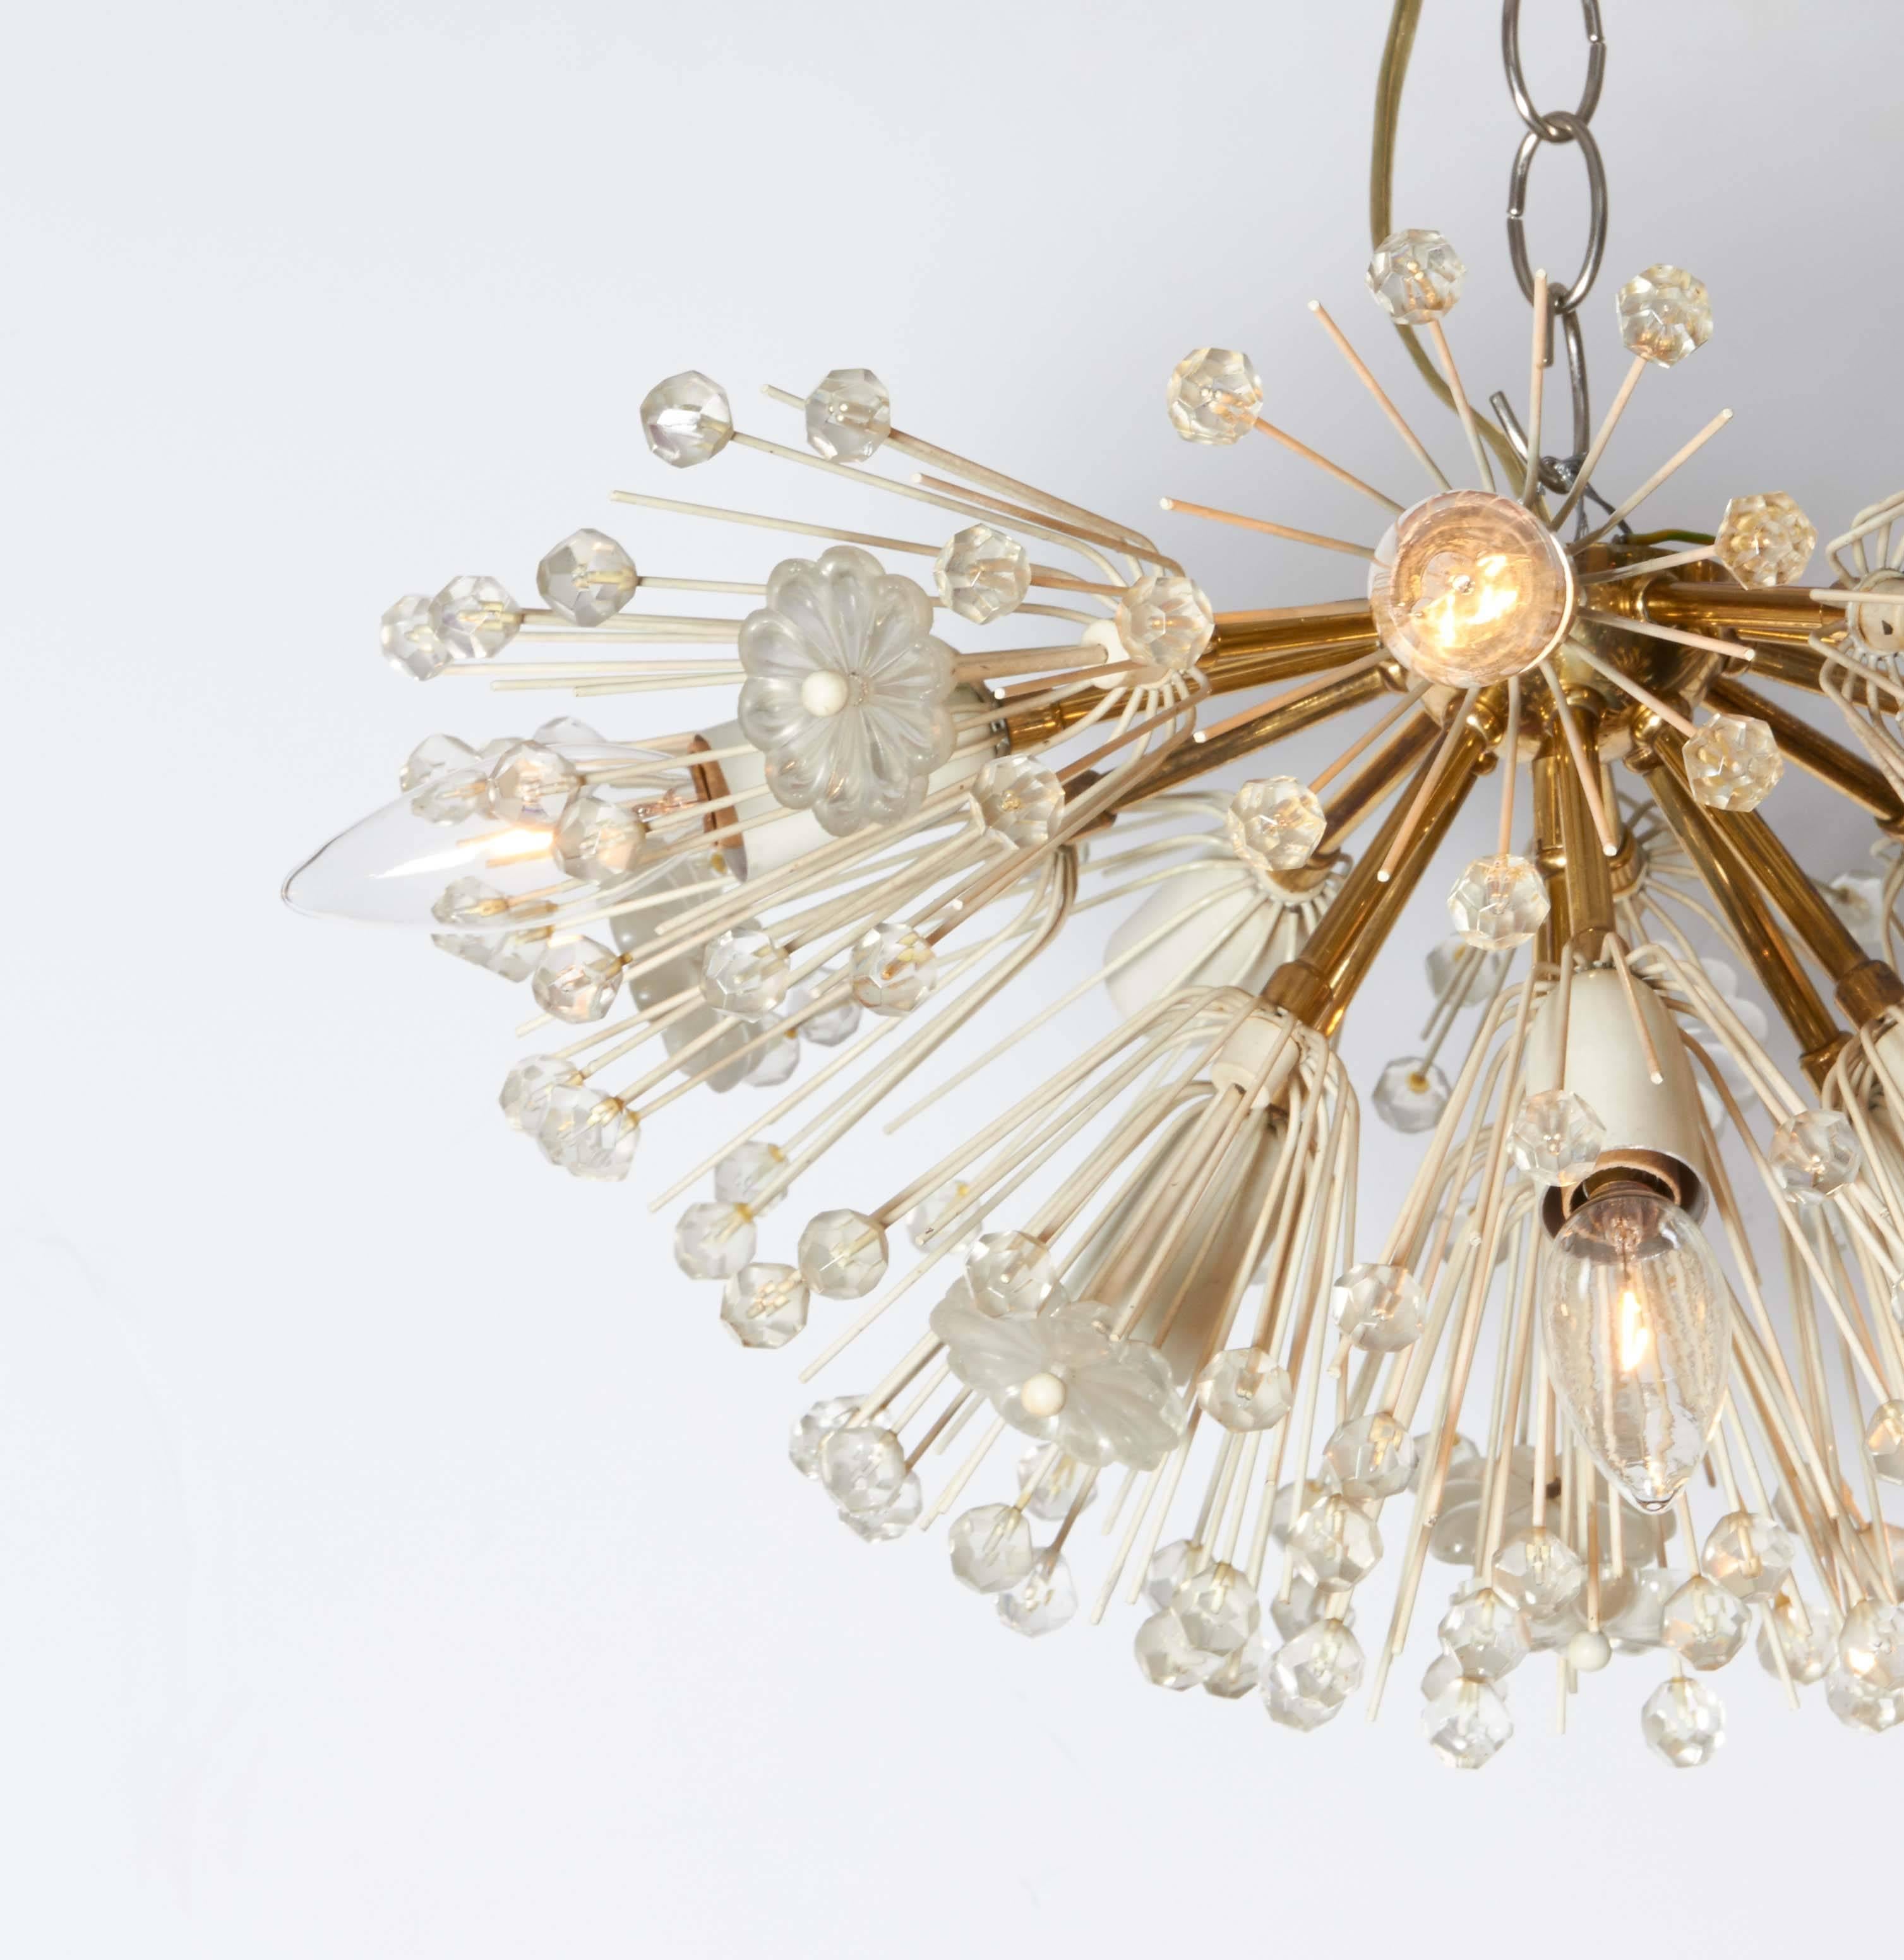 A Sputnik chandelier by Austrian designer Emil Stejnar, manufactured circa 1950s, with brass flush mount nucleus and arms, white enameled socket covers, and surrounding faceted glass beads and rosettes. This light fixture remains in very good